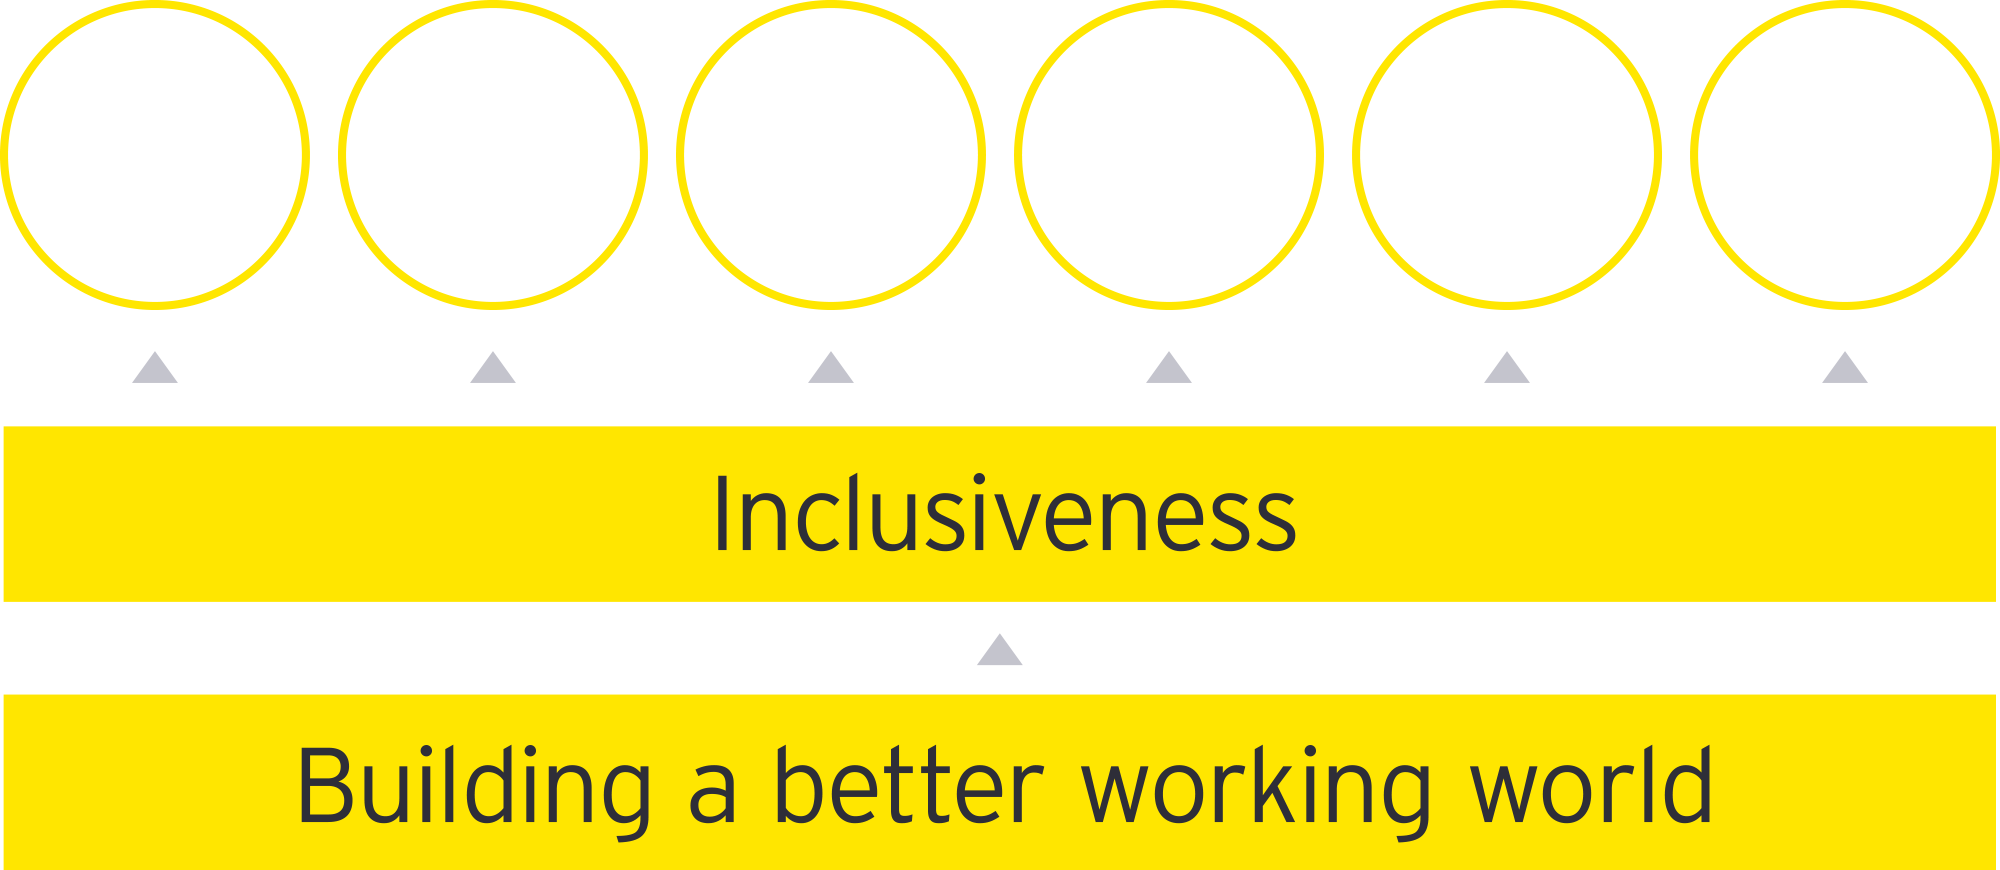 Gender、LGBT+、Multi Culture、Work Life Management、Diversified Abilities(PwD)、Generation